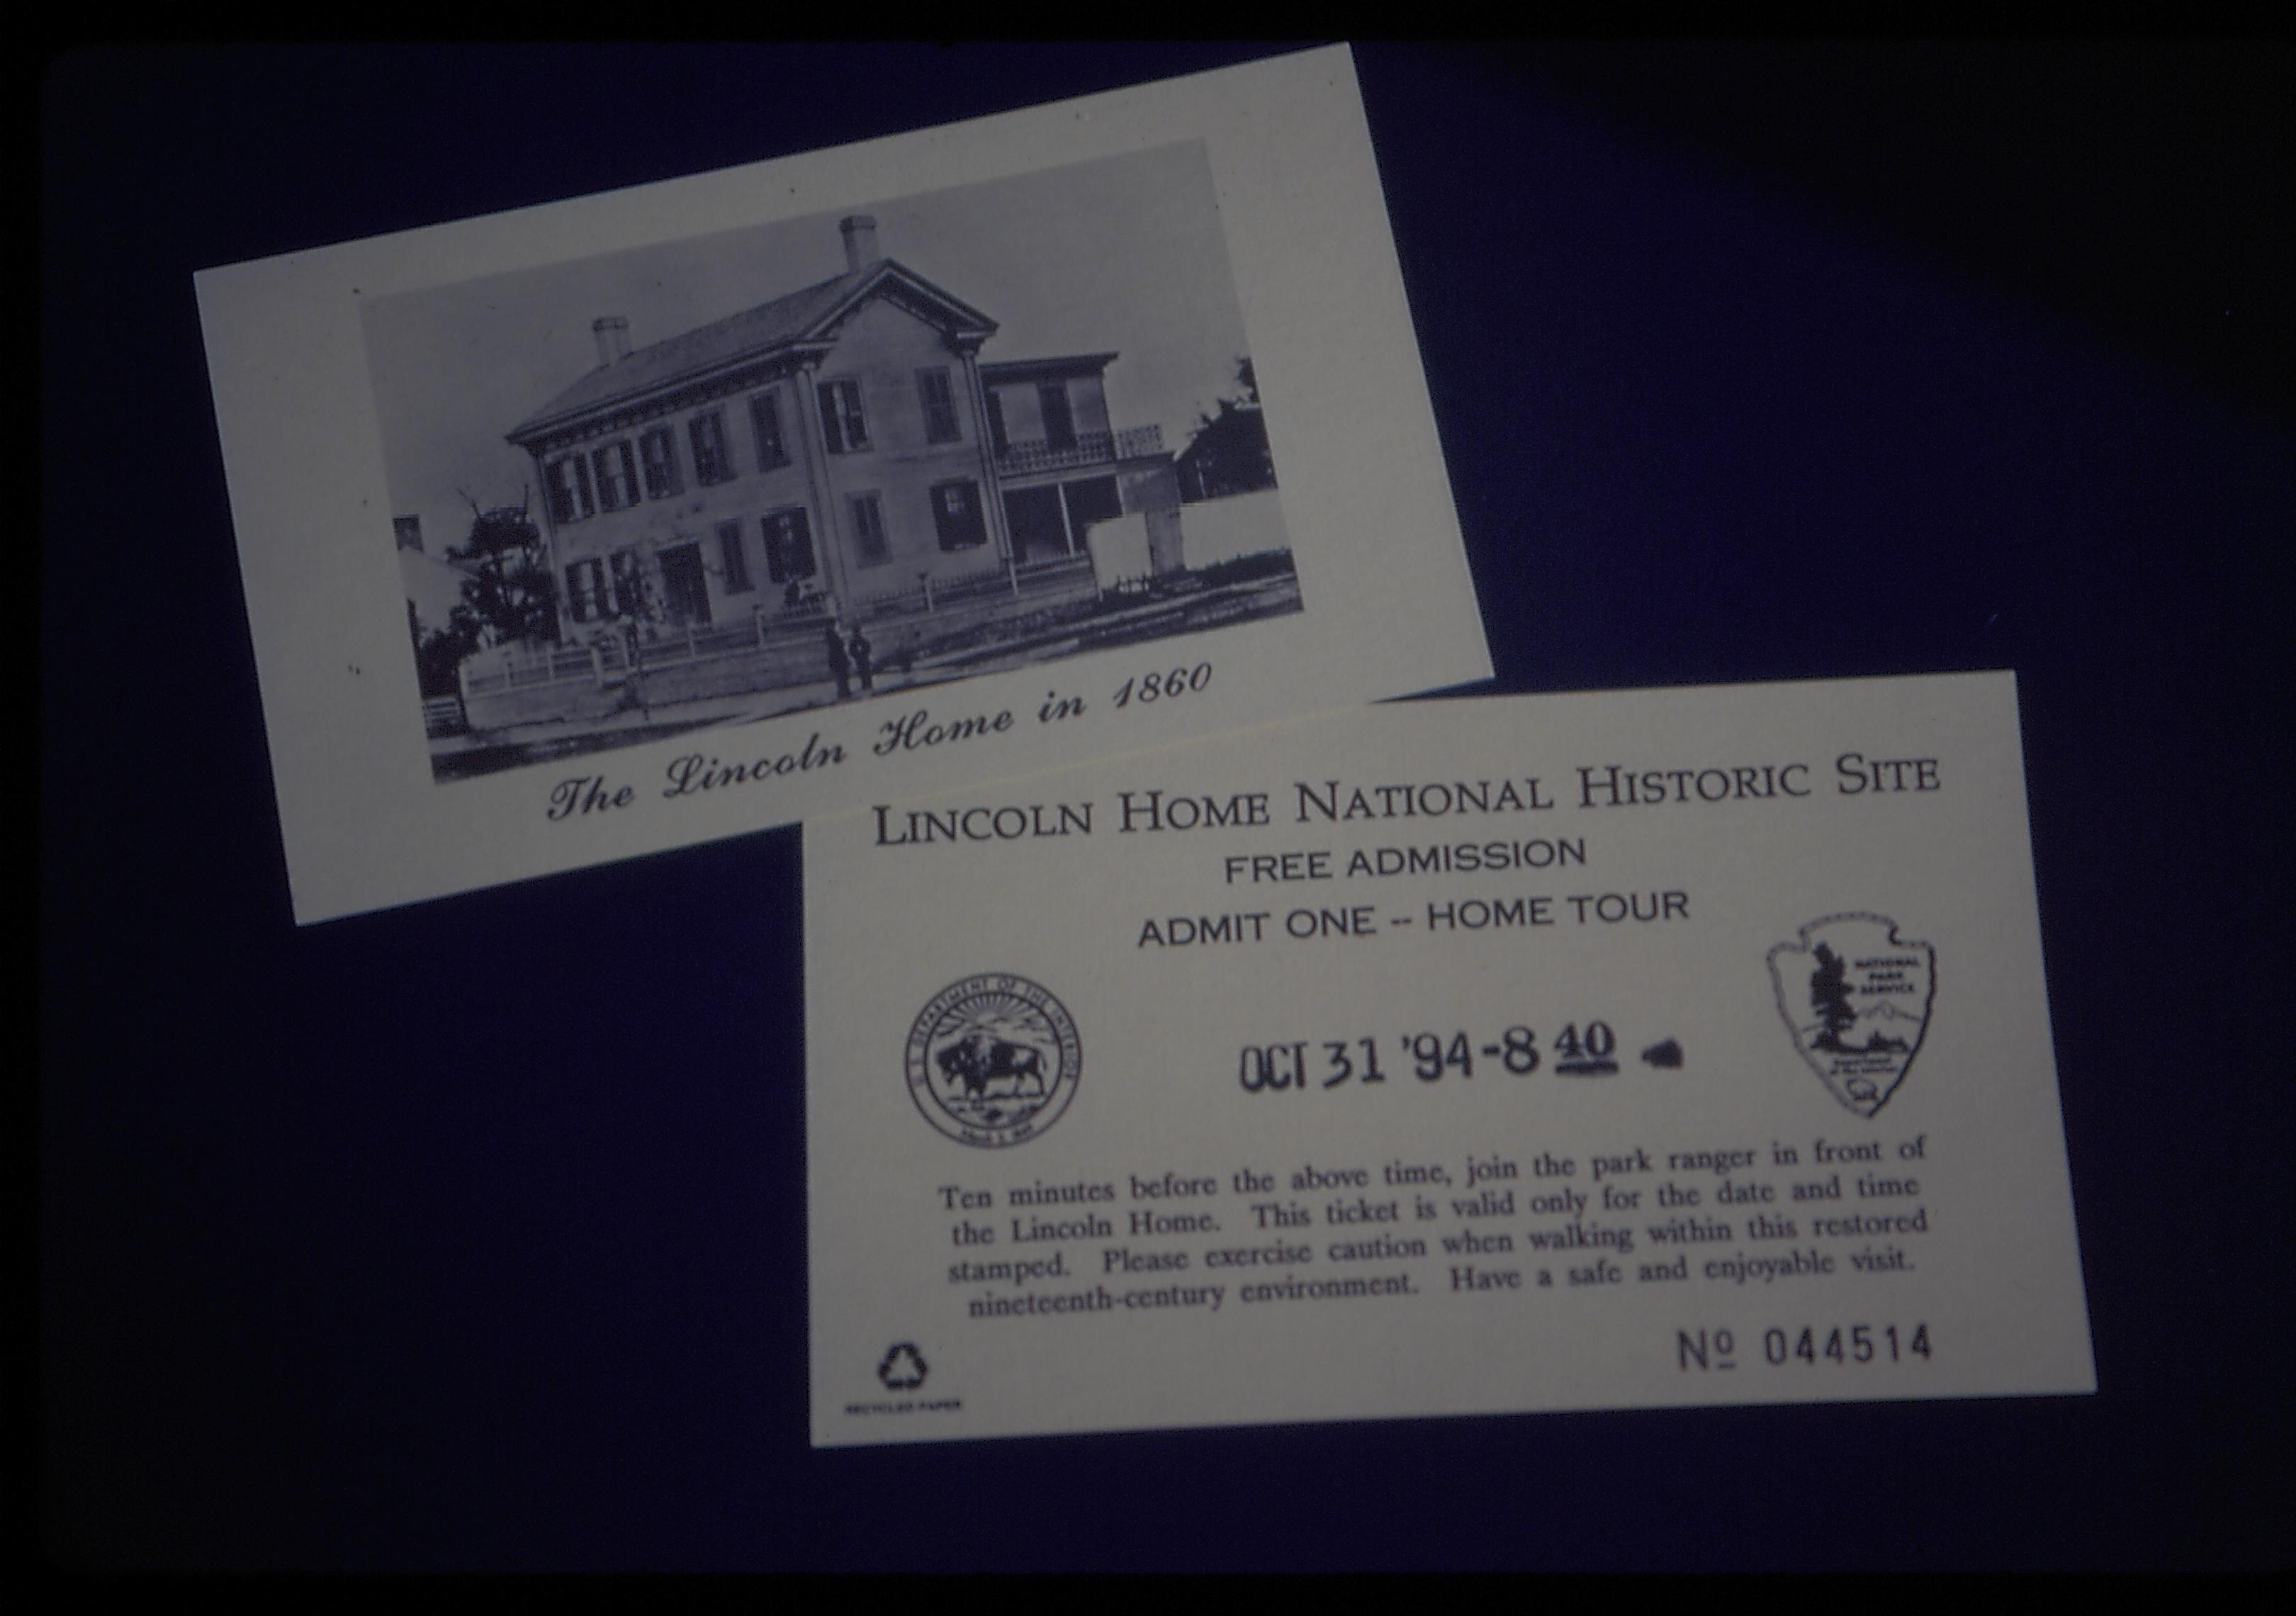 NA Lincoln Home NHS- Visitor Center, 17 Visitor Center, ticket, admission